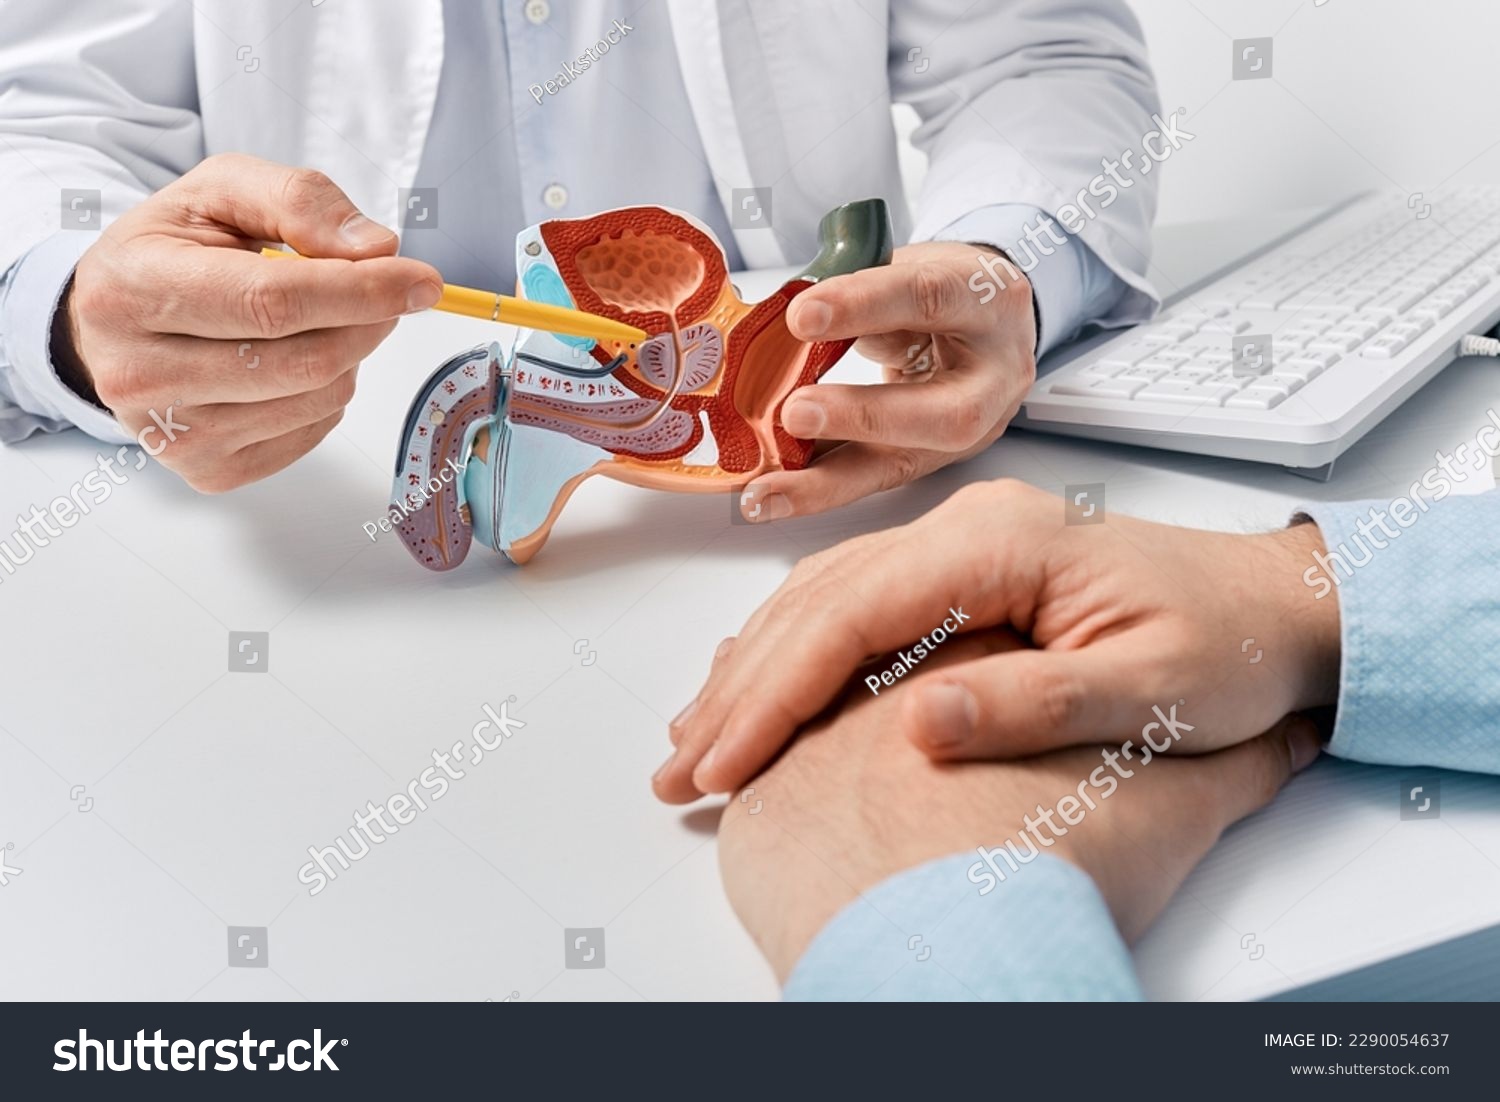 Prostate disease and treatment. Male reproductive system anatomical model in doctors hands close-up during consultation of male patient with suspected bacterial prostatitis #2290054637